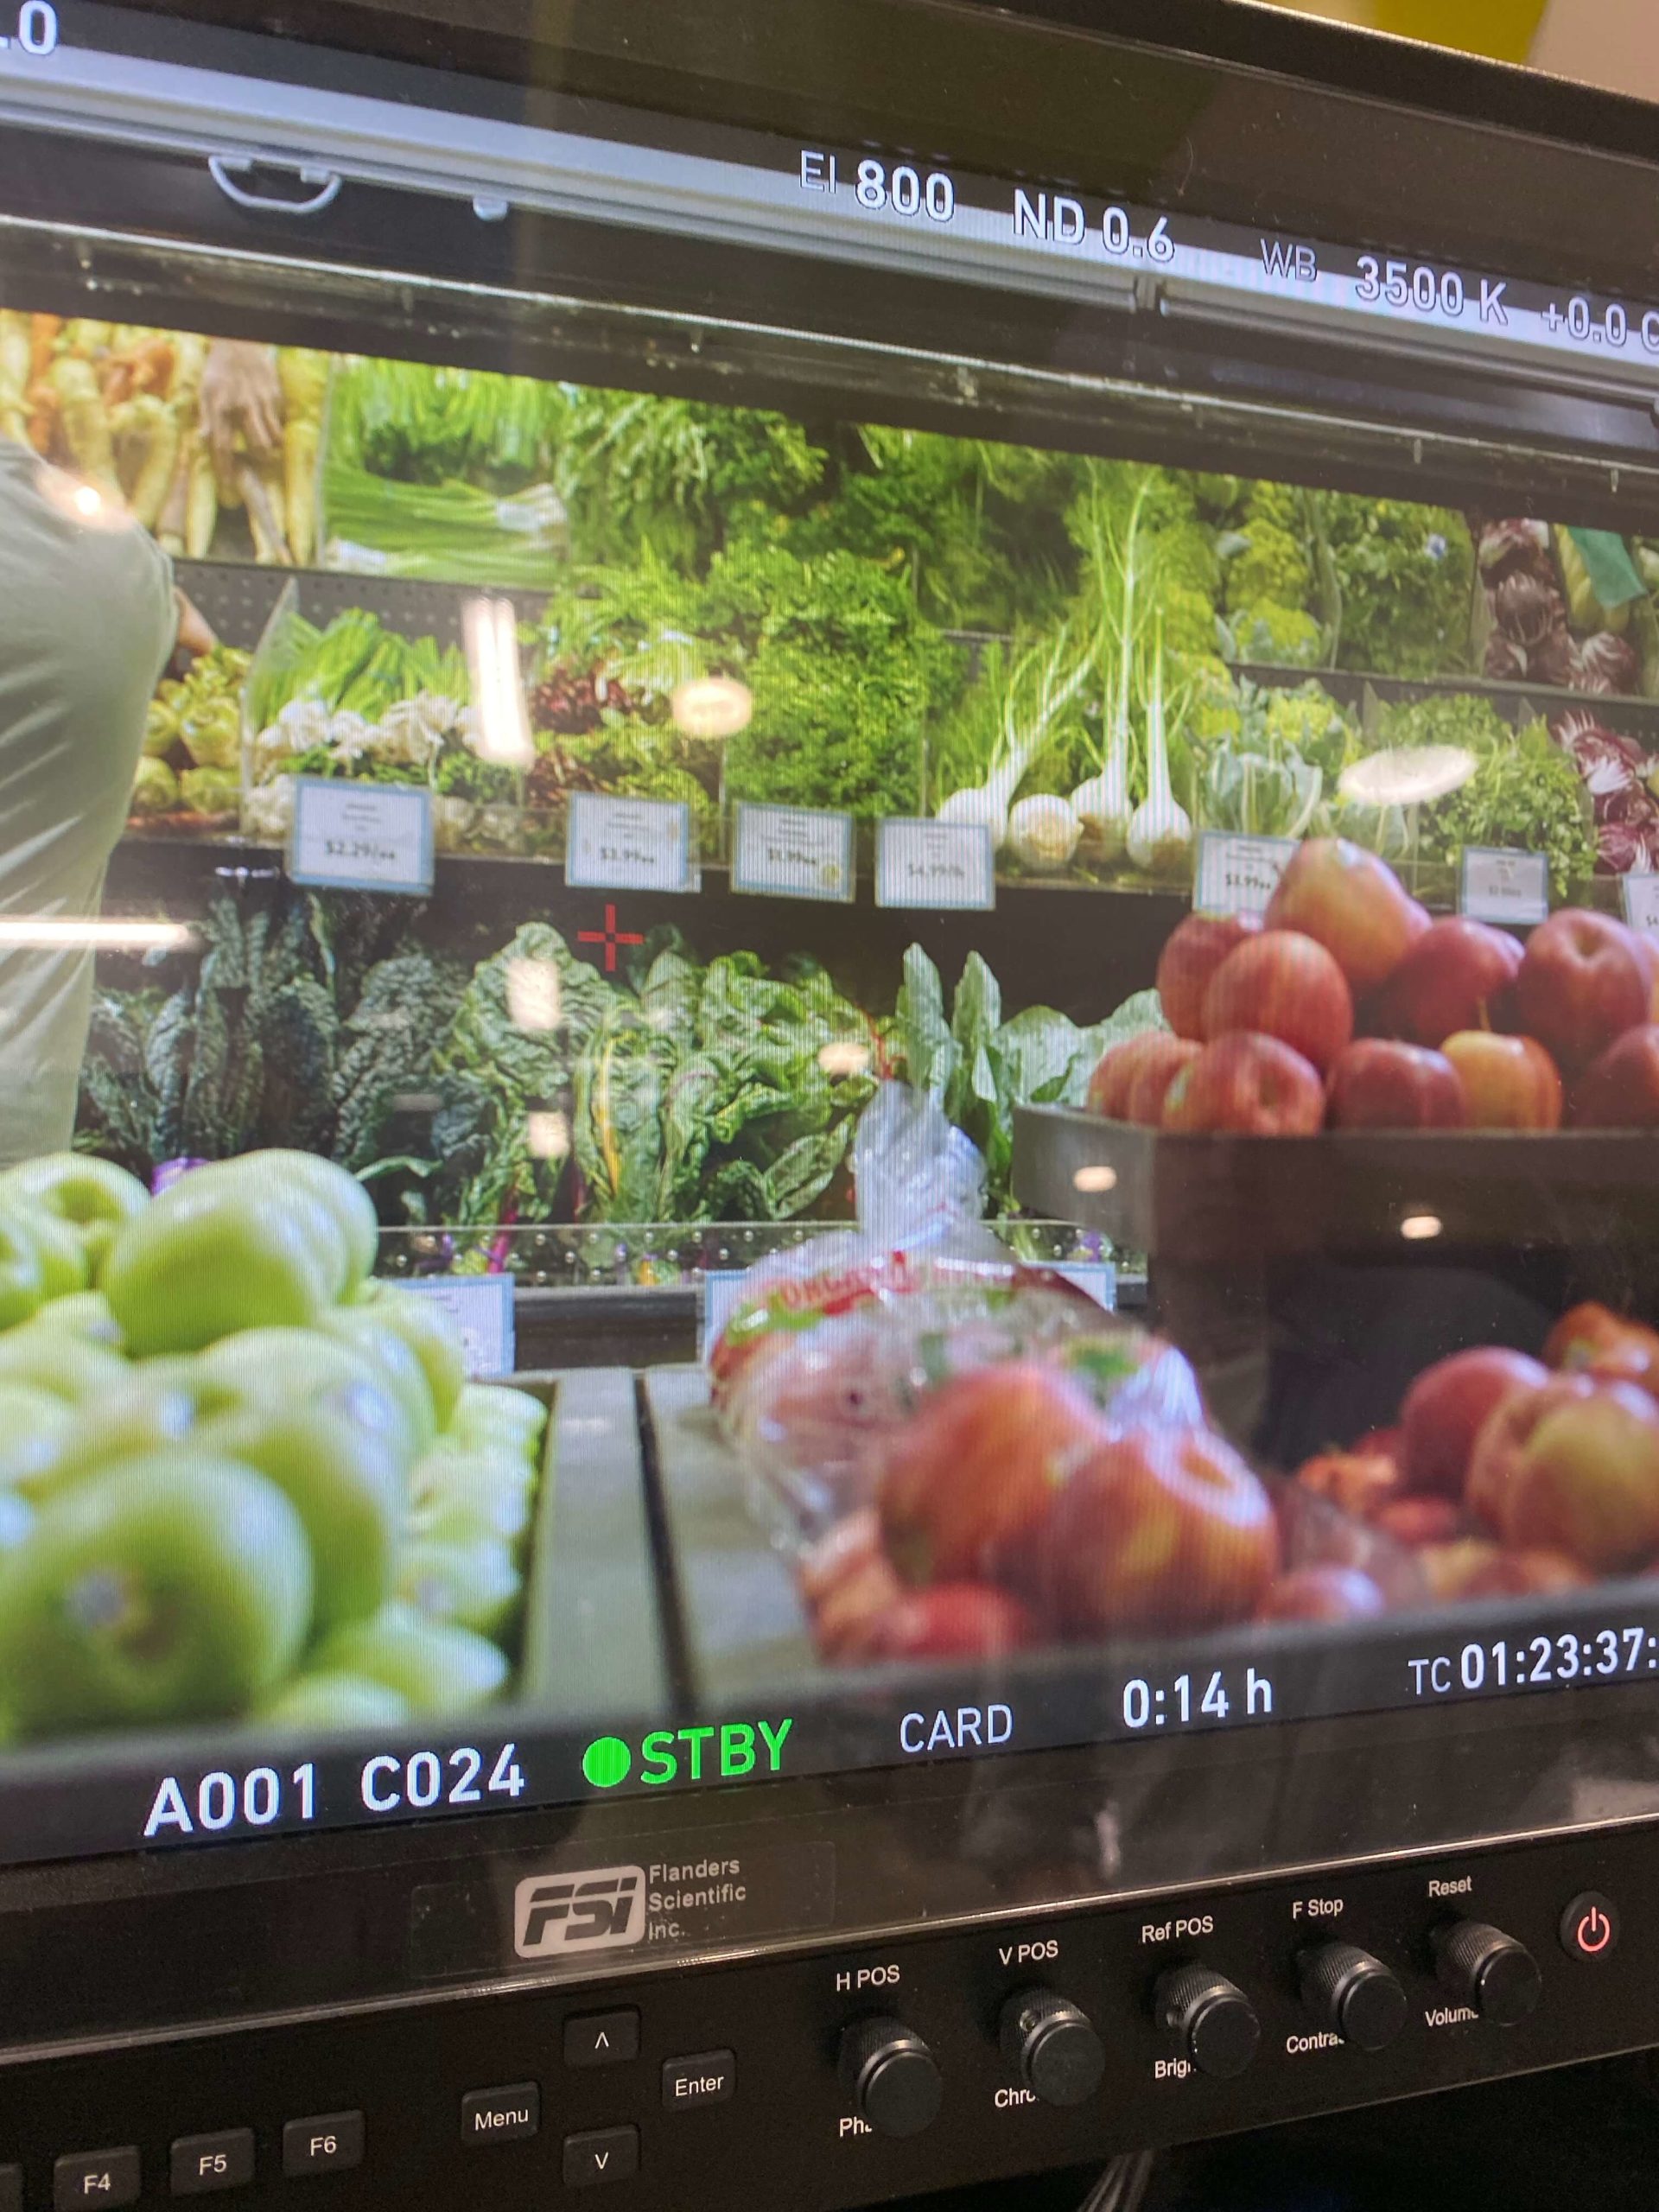 monitor view of produce